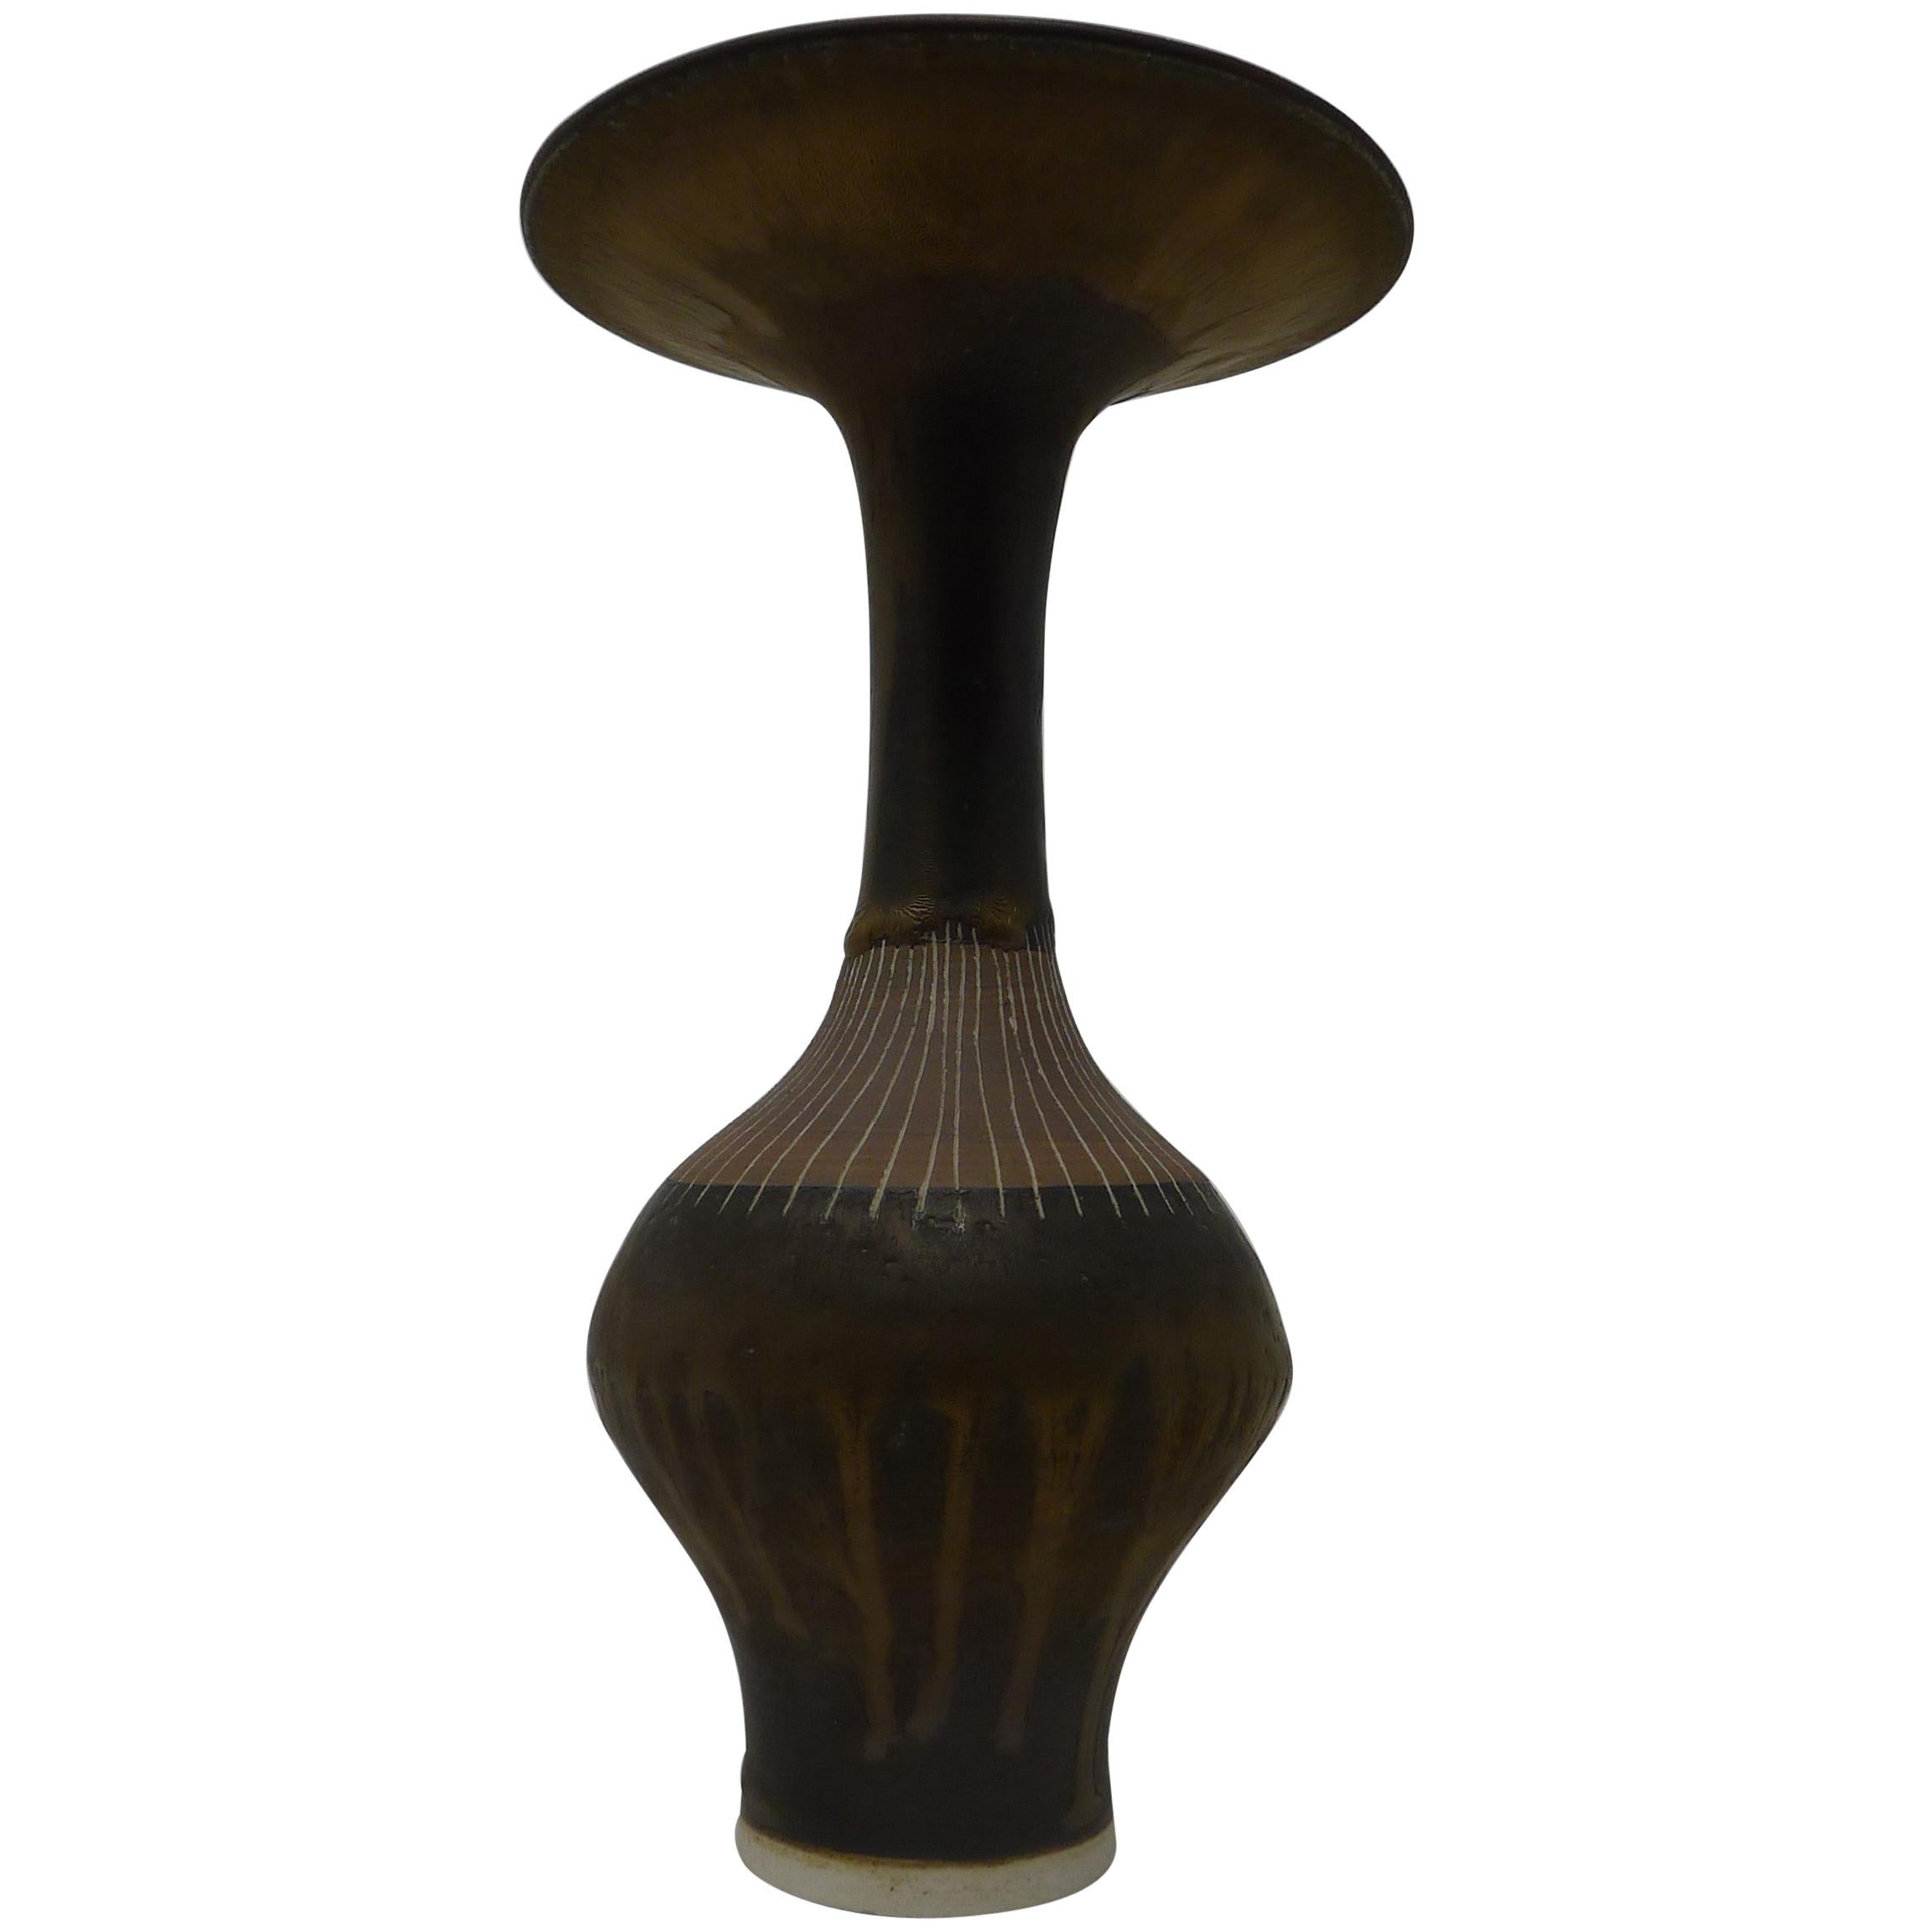 Lucie Rie, Vase with Flaring Rim, Signed with Impressed Mark